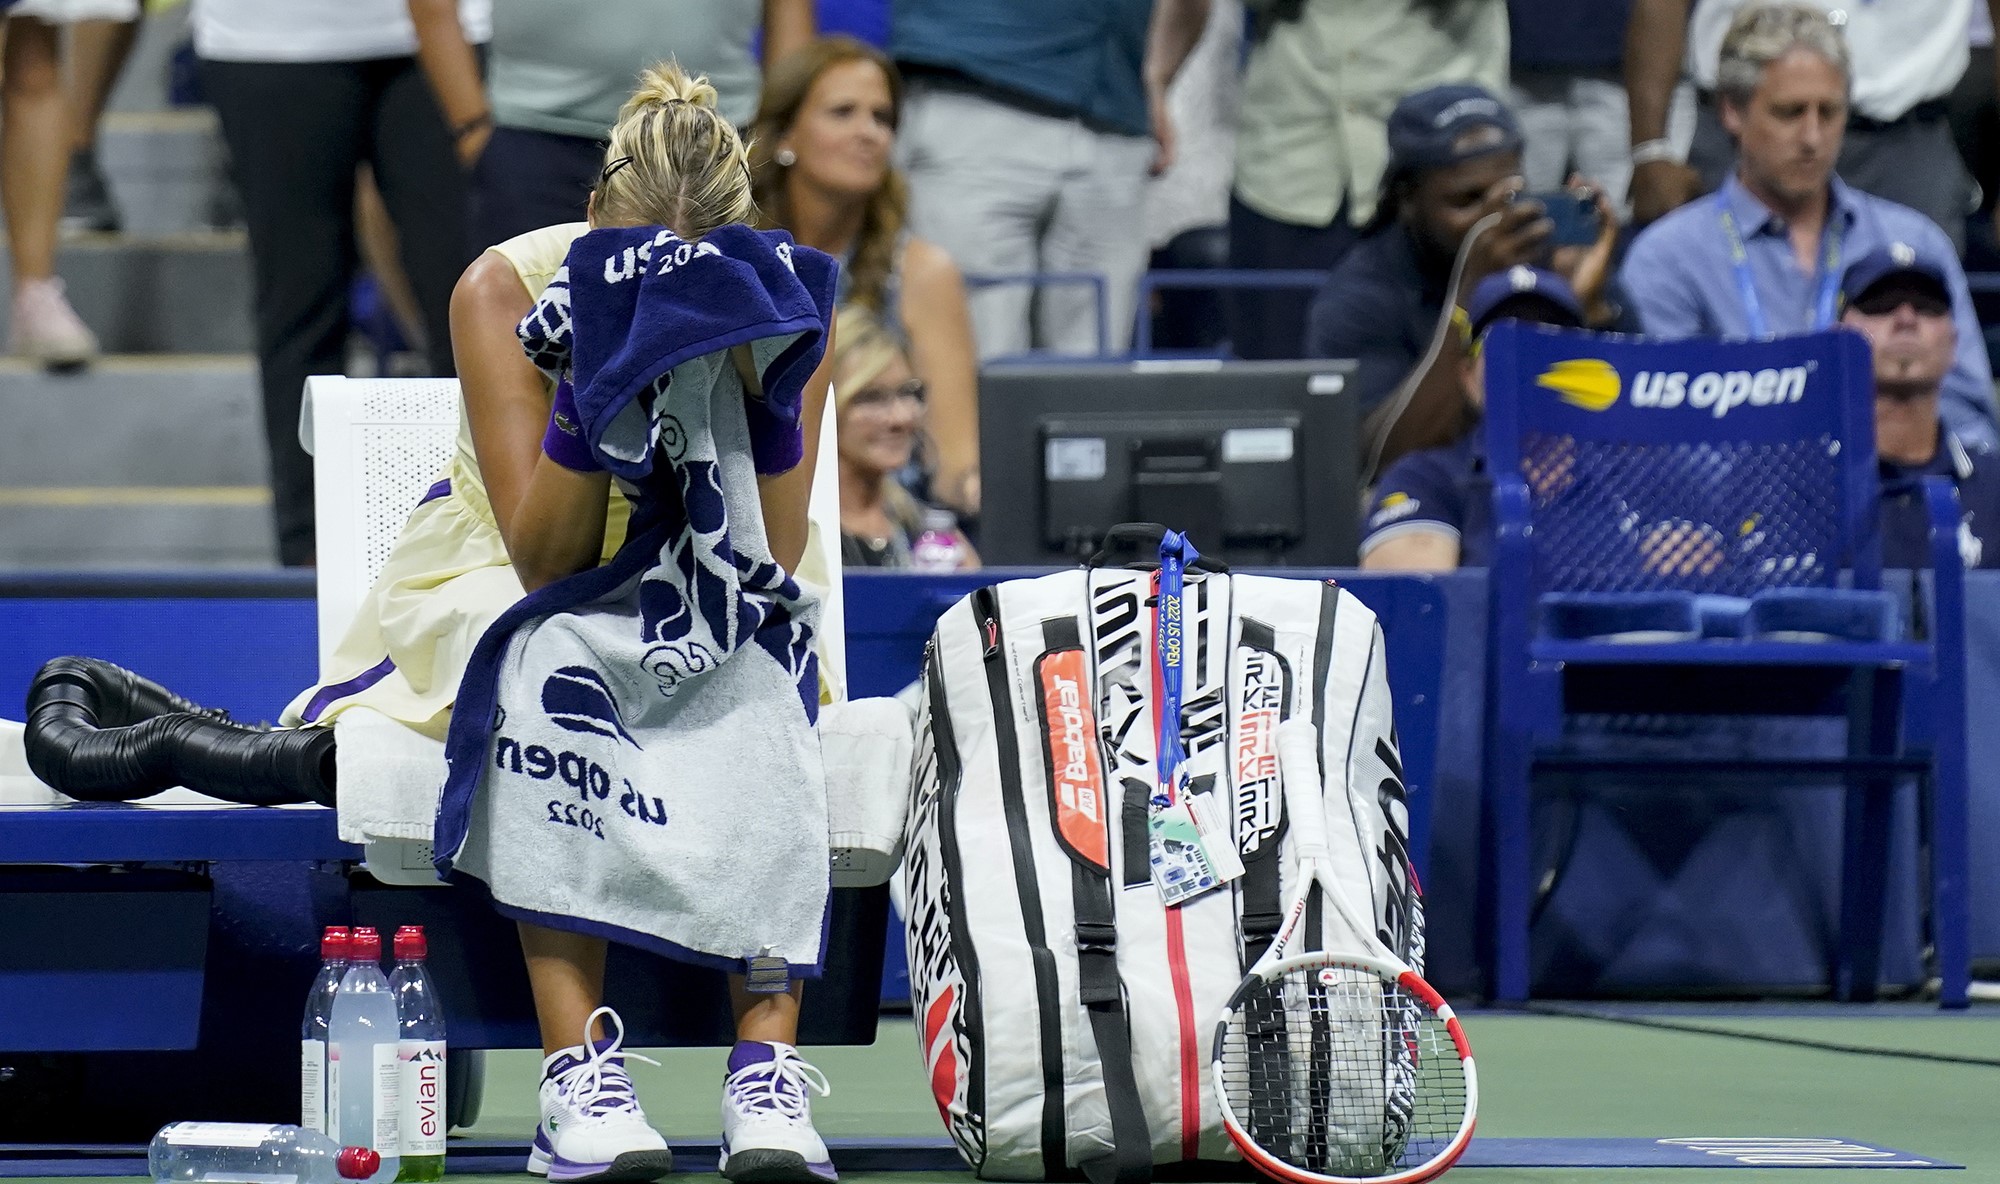 A woman holds a towel in her hand at the US Open.